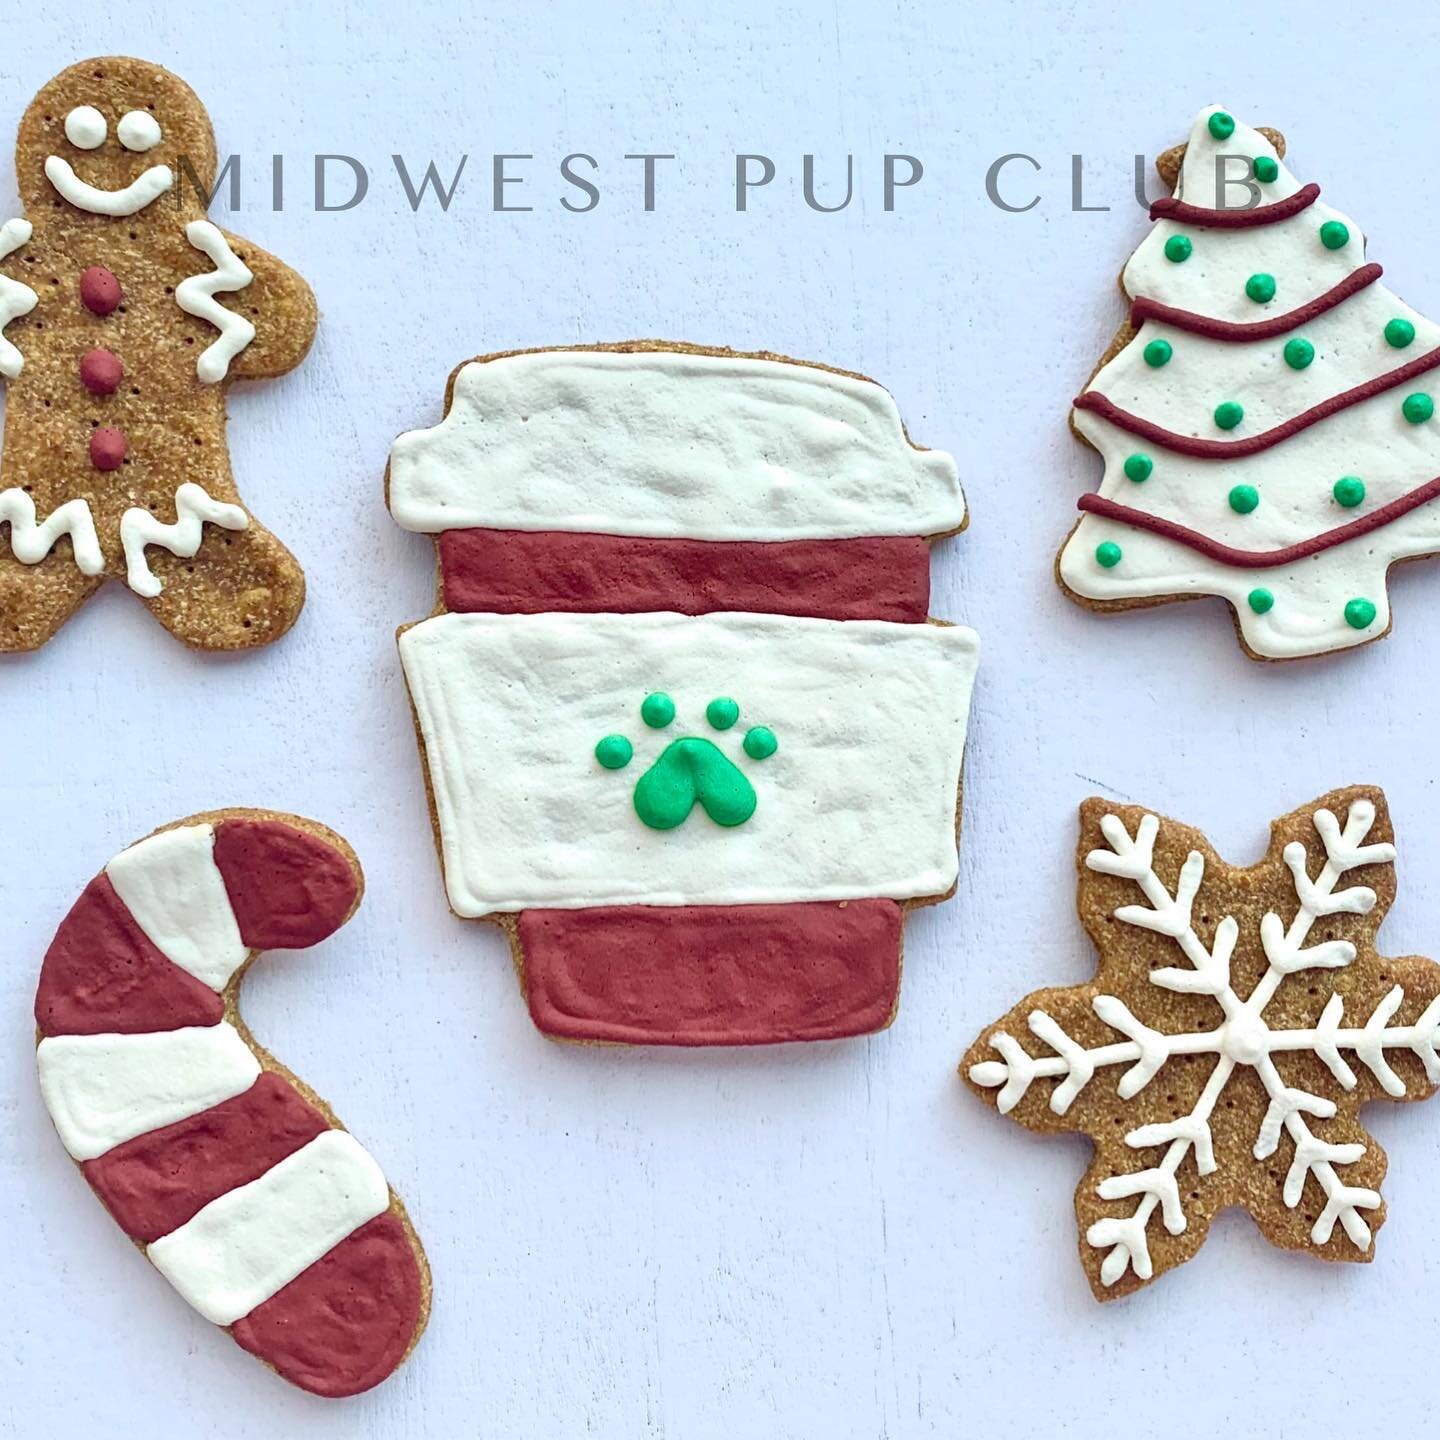 We are ✨SOLD OUT✨ of our iced treats at Lou Belle and Bing!! Check back in THURSDAY, 12/15 for a R E S T O C K! 🐾 Our plain treats are available! 

www.Midwestpupclub.com